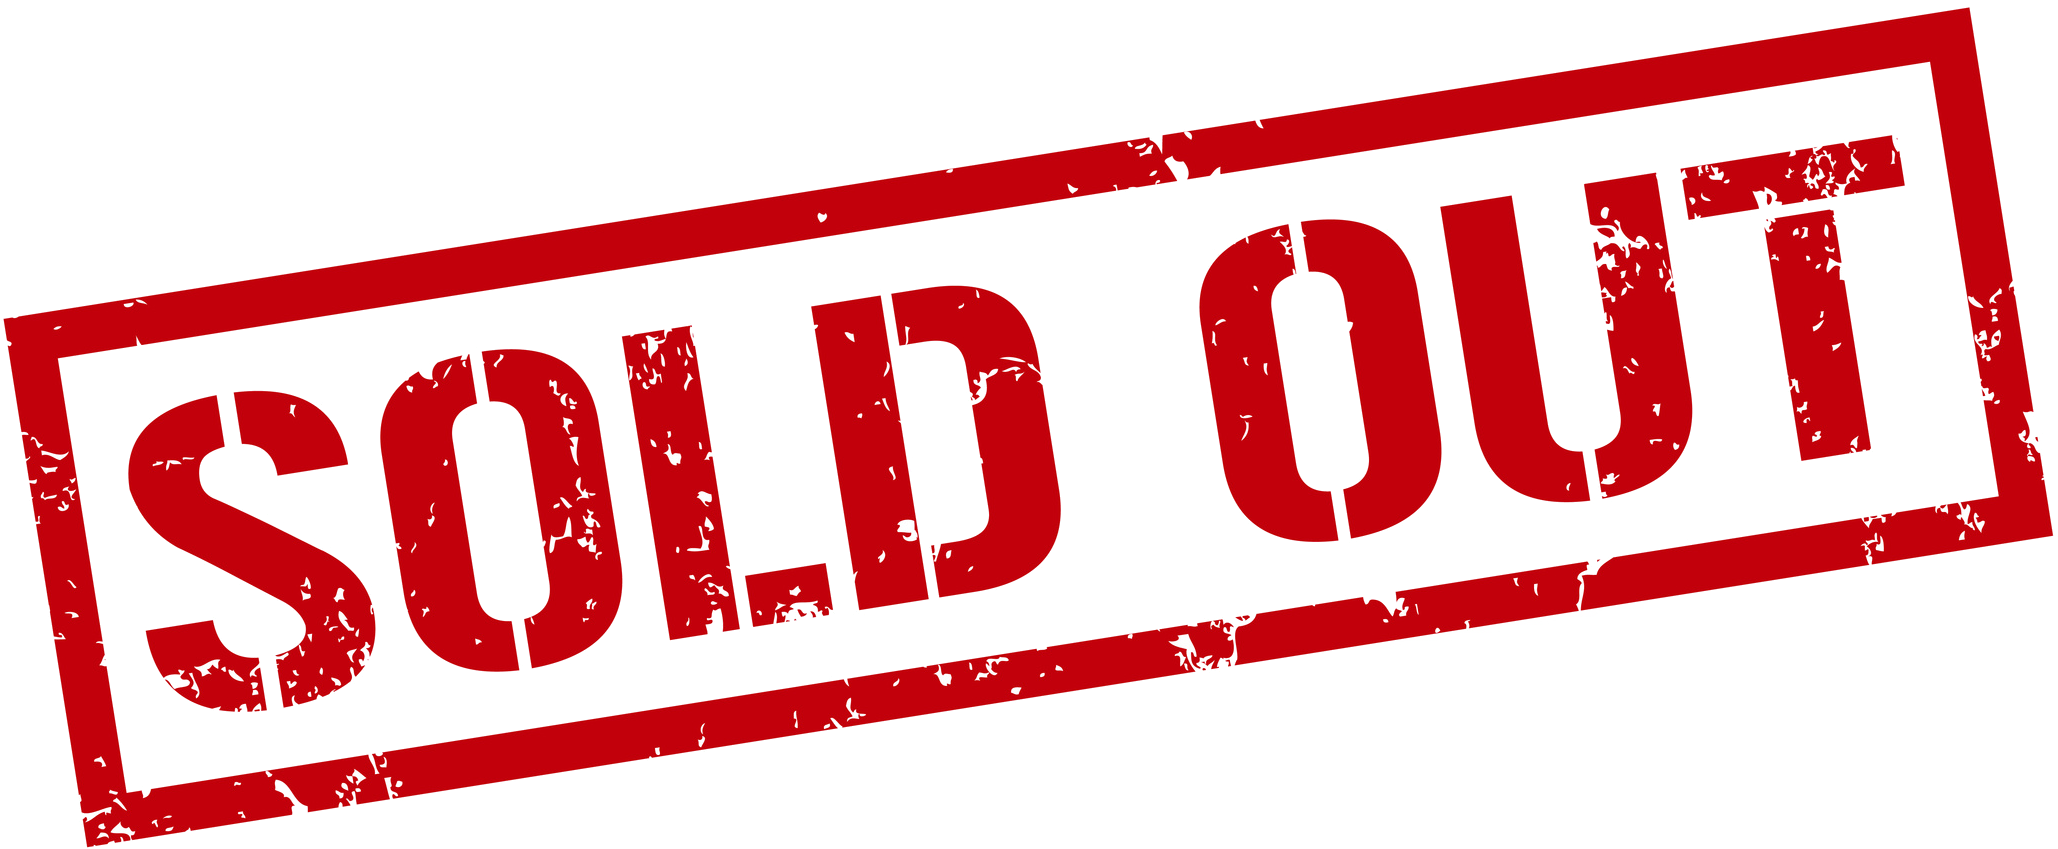 Sold Out Png Sold Out Transparent Png